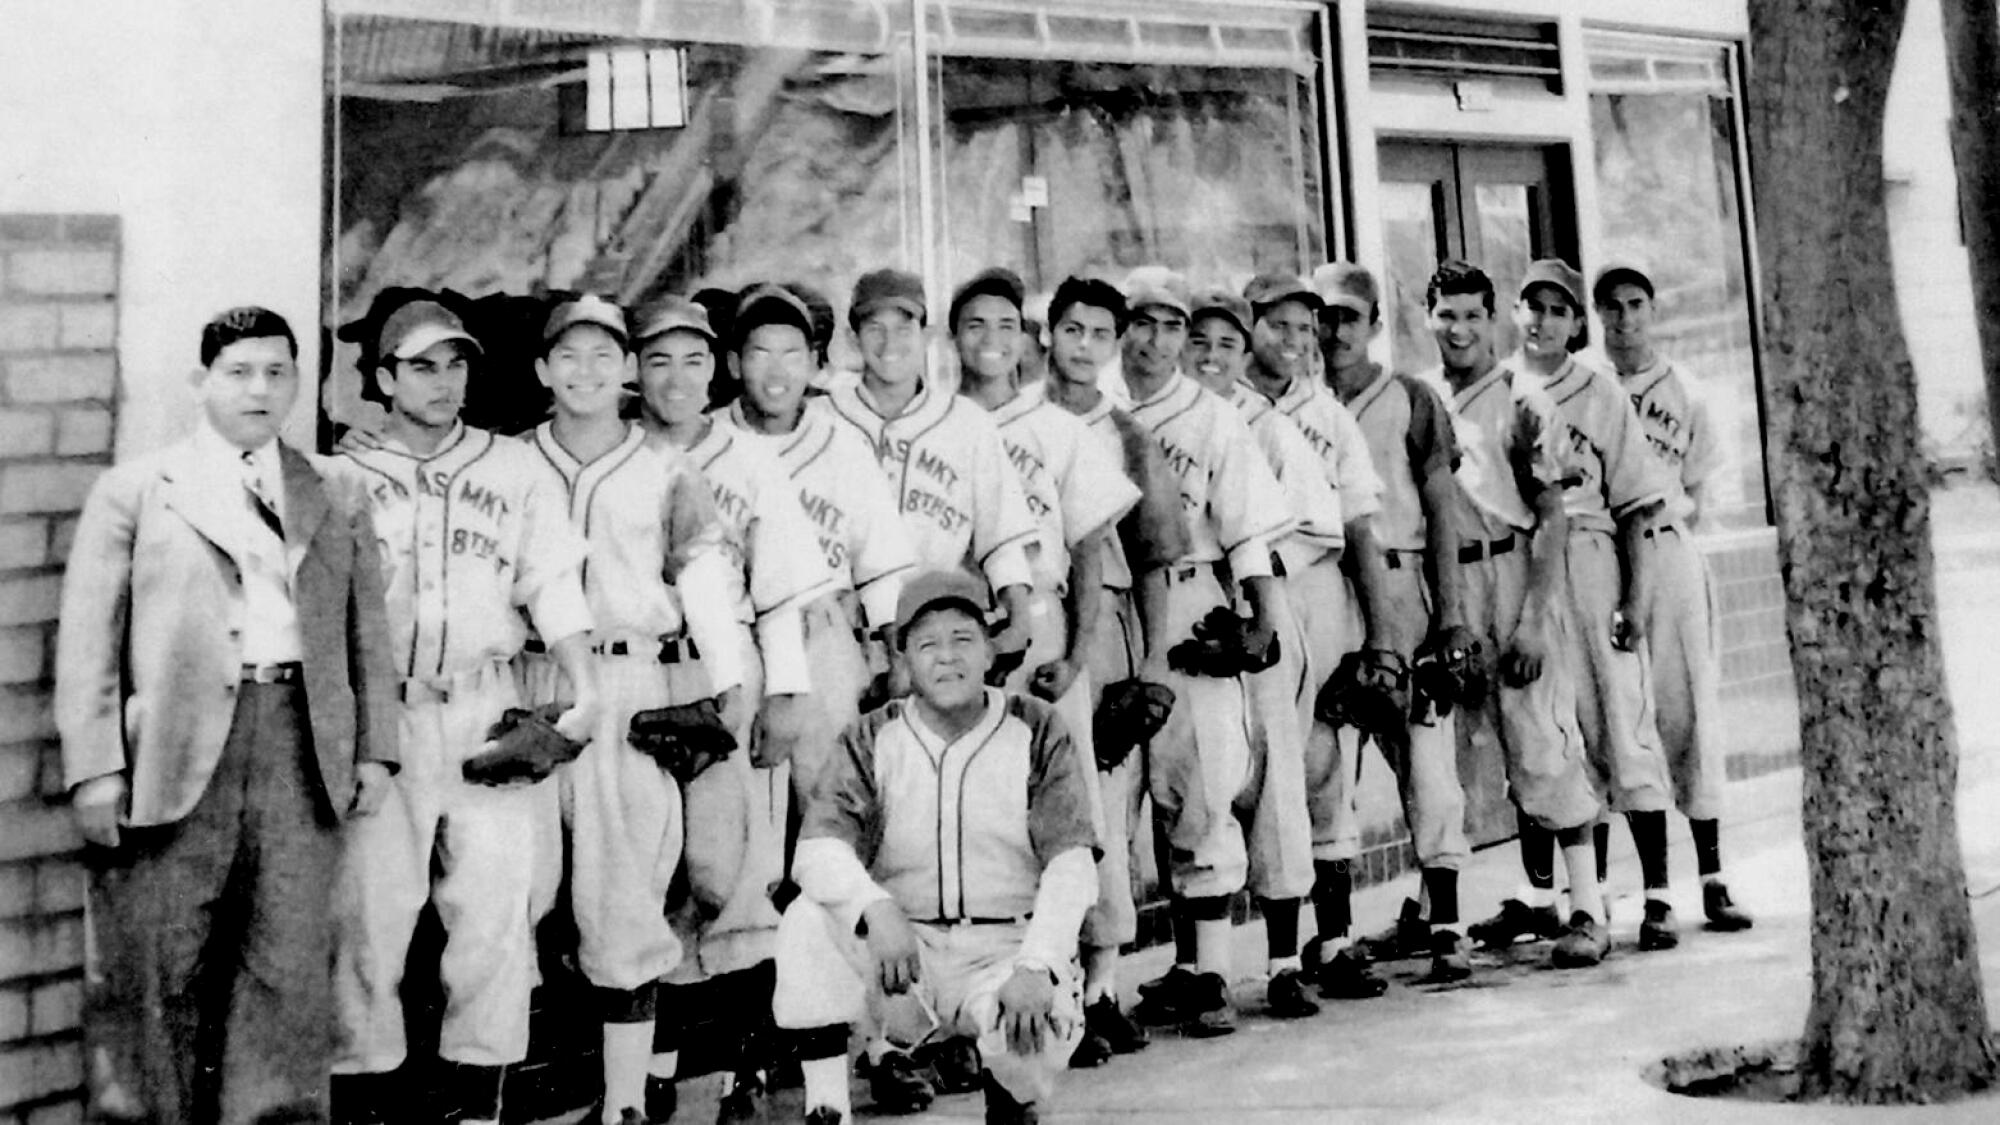 The 1949 Ornelas Food Market baseball team, from "Mexican American Baseball in East Los Angeles."